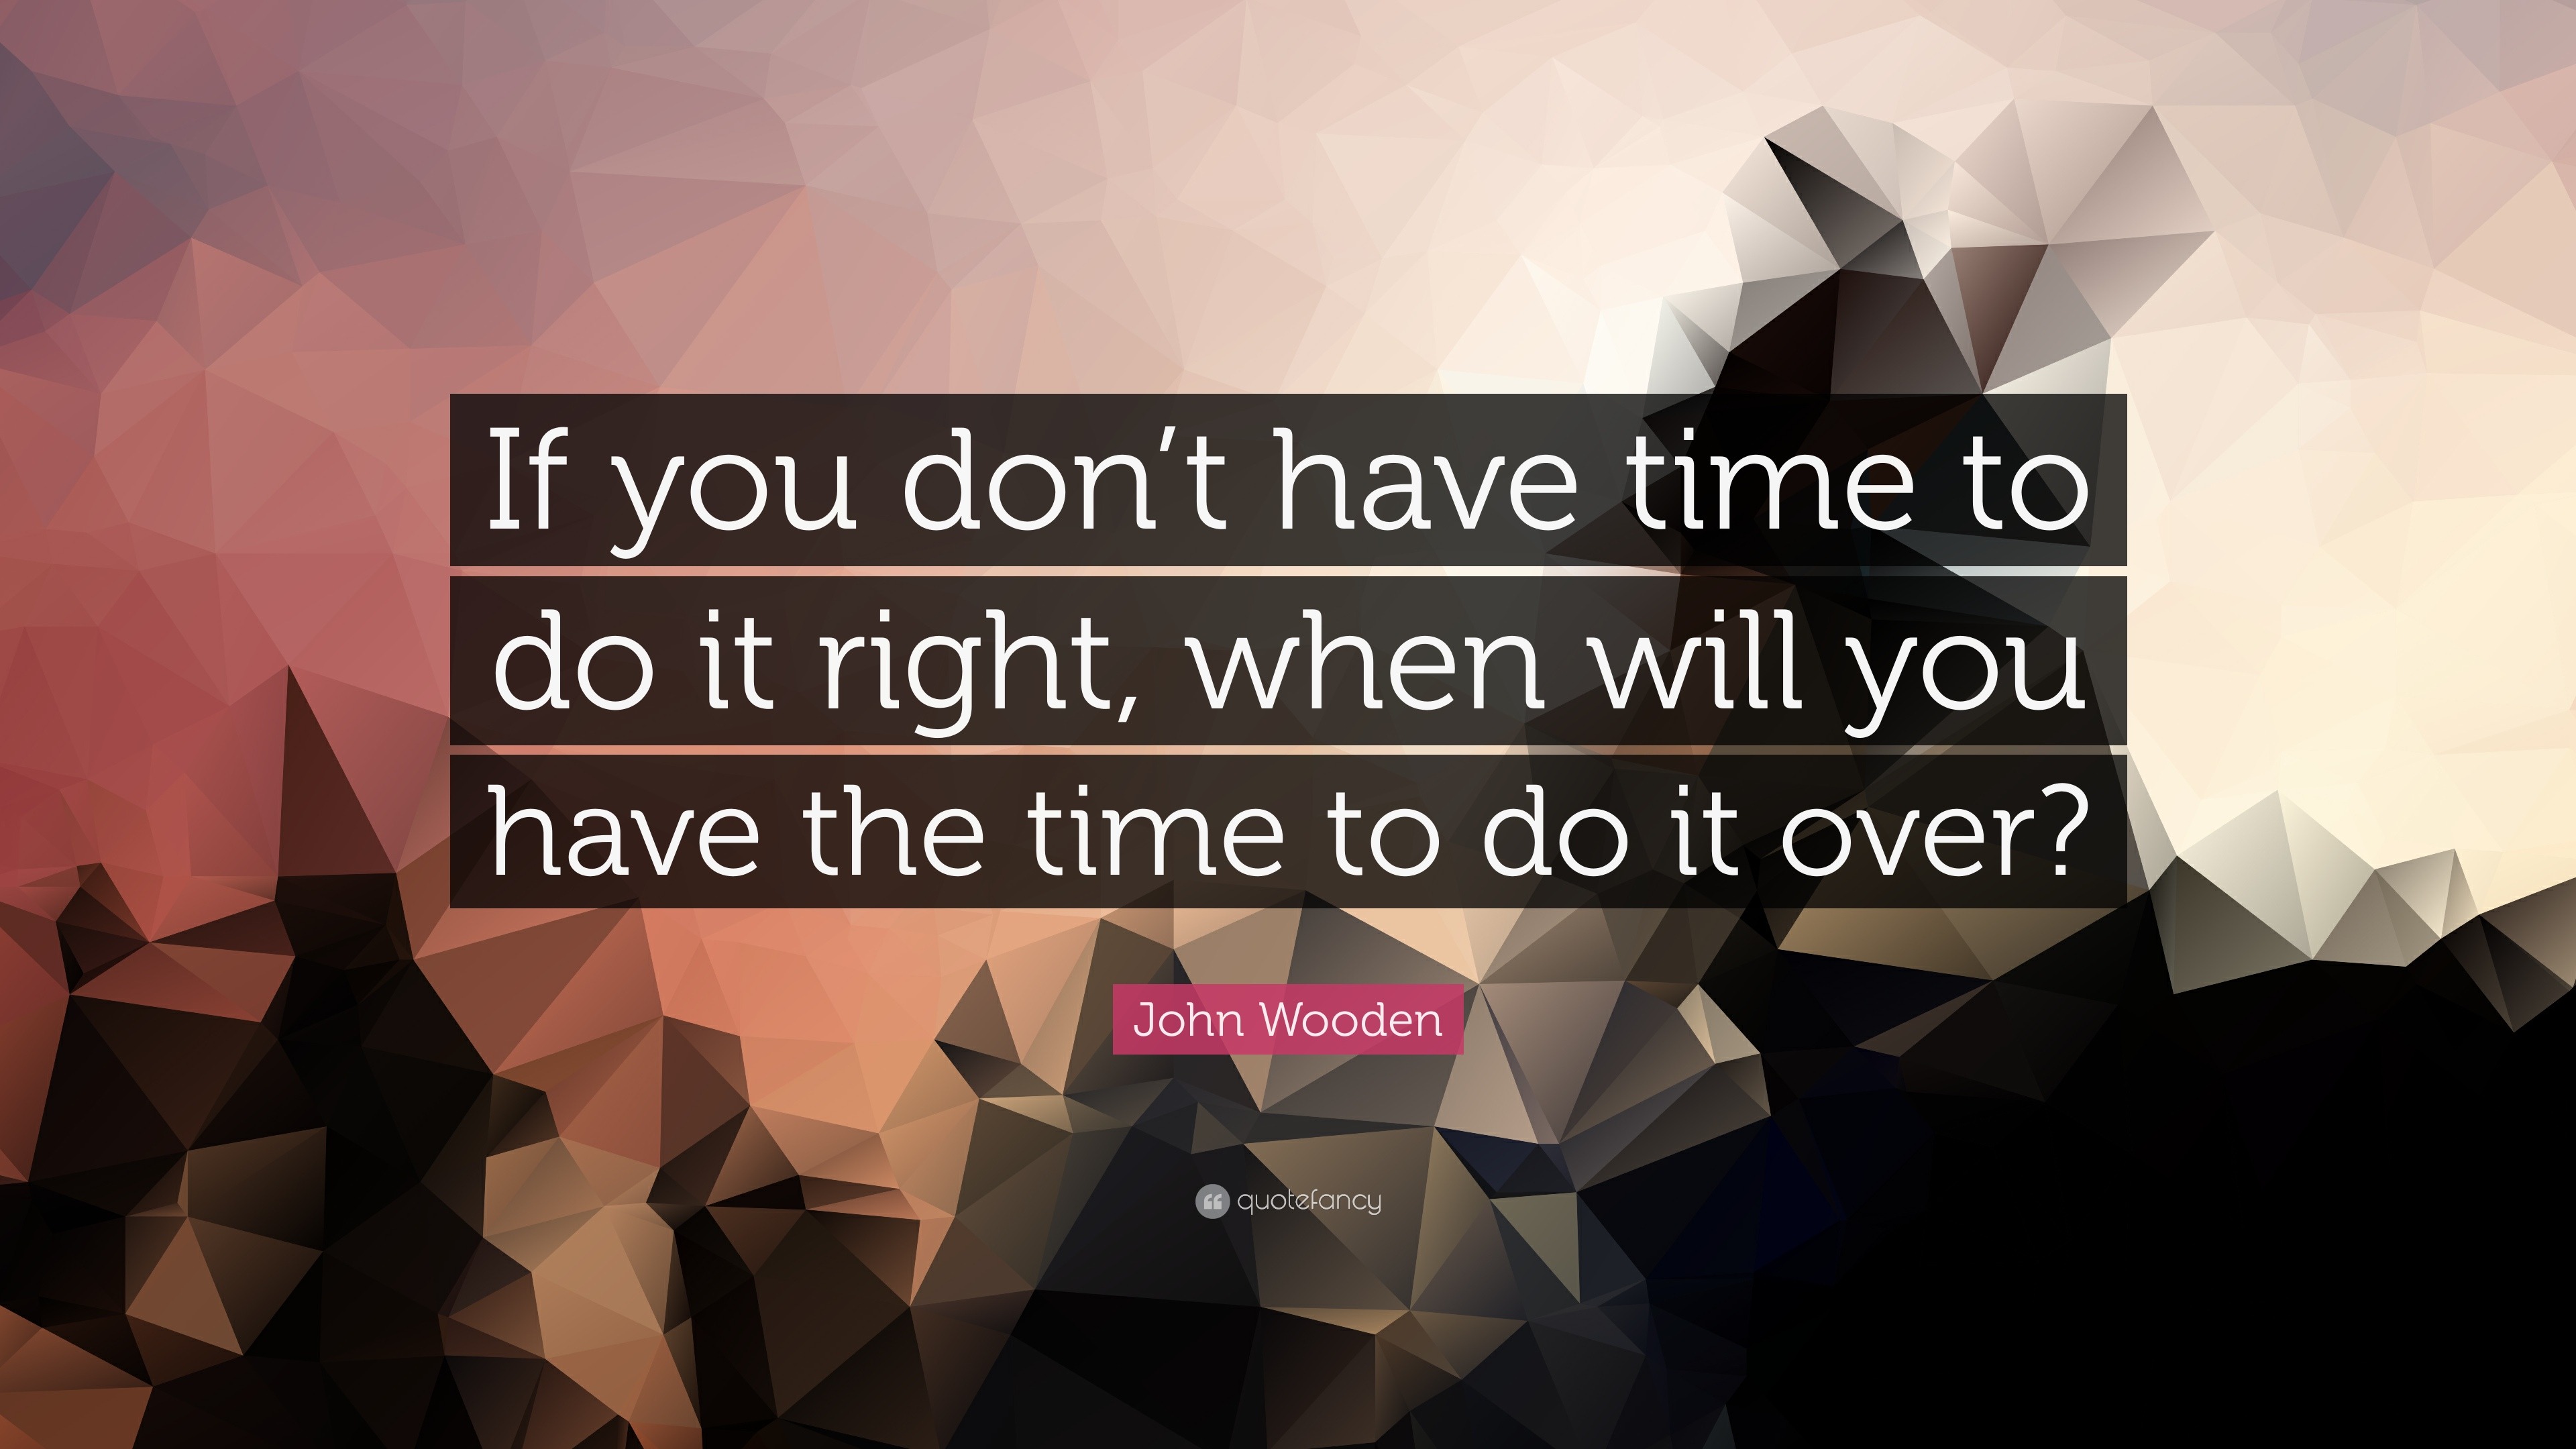 John Wooden Quote: “If you don’t have time to do it right, when will